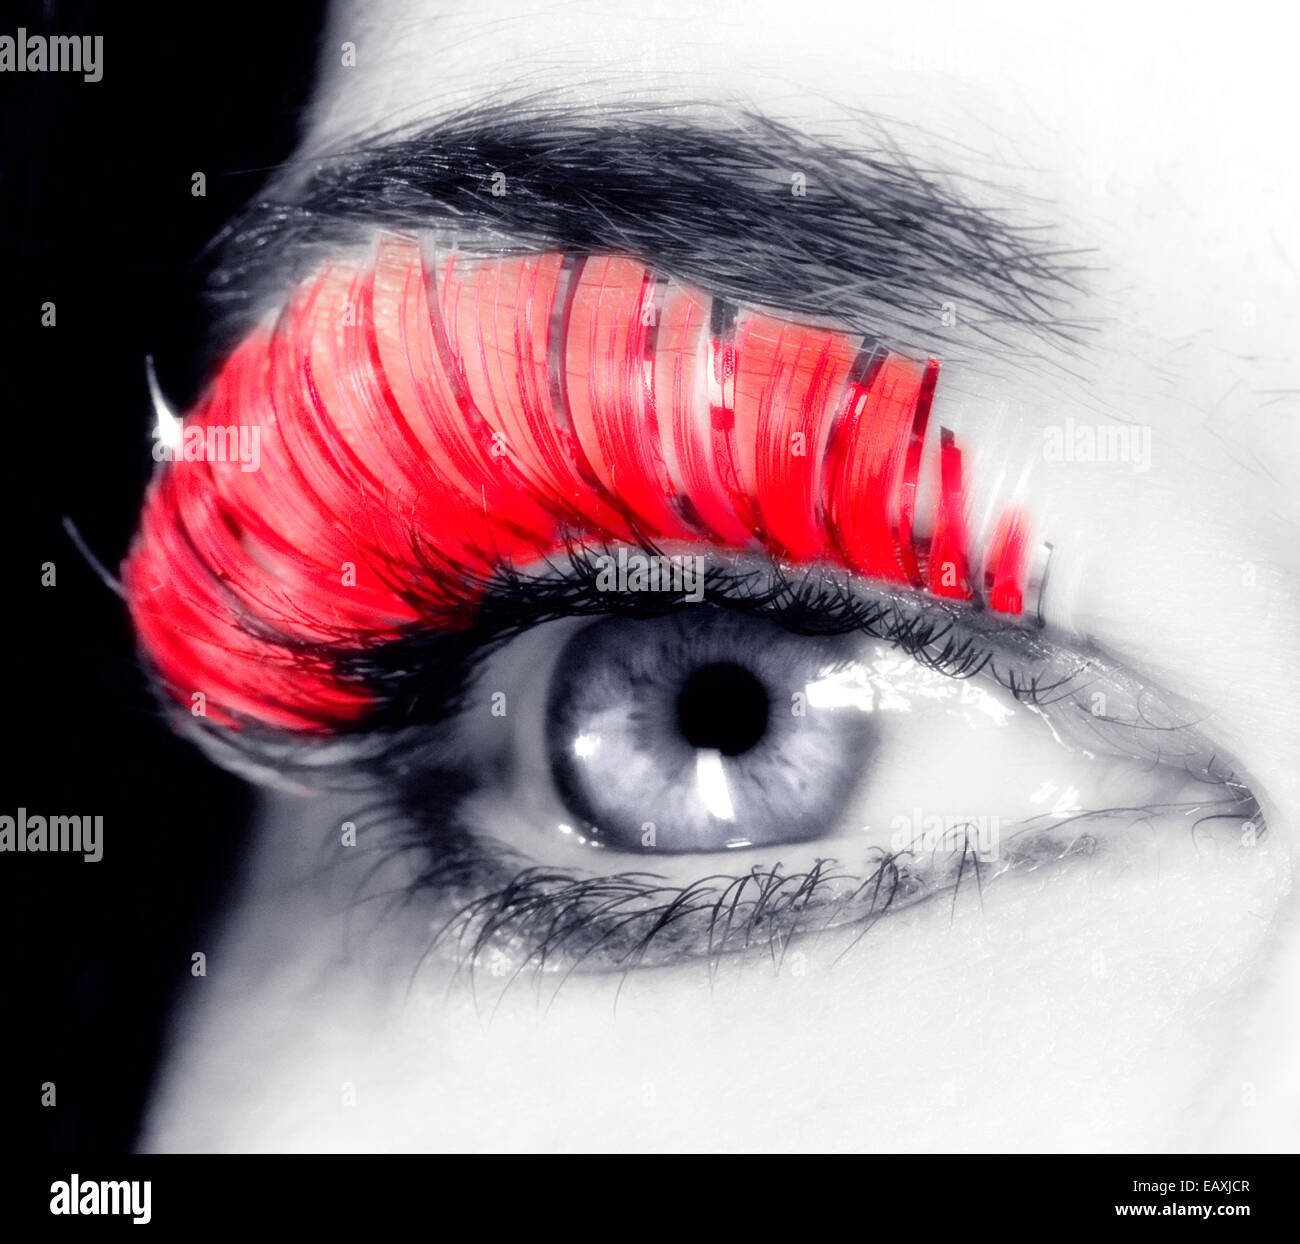 Extreme Closeup of an Eye with Long Red Eyelashes Stock Photo